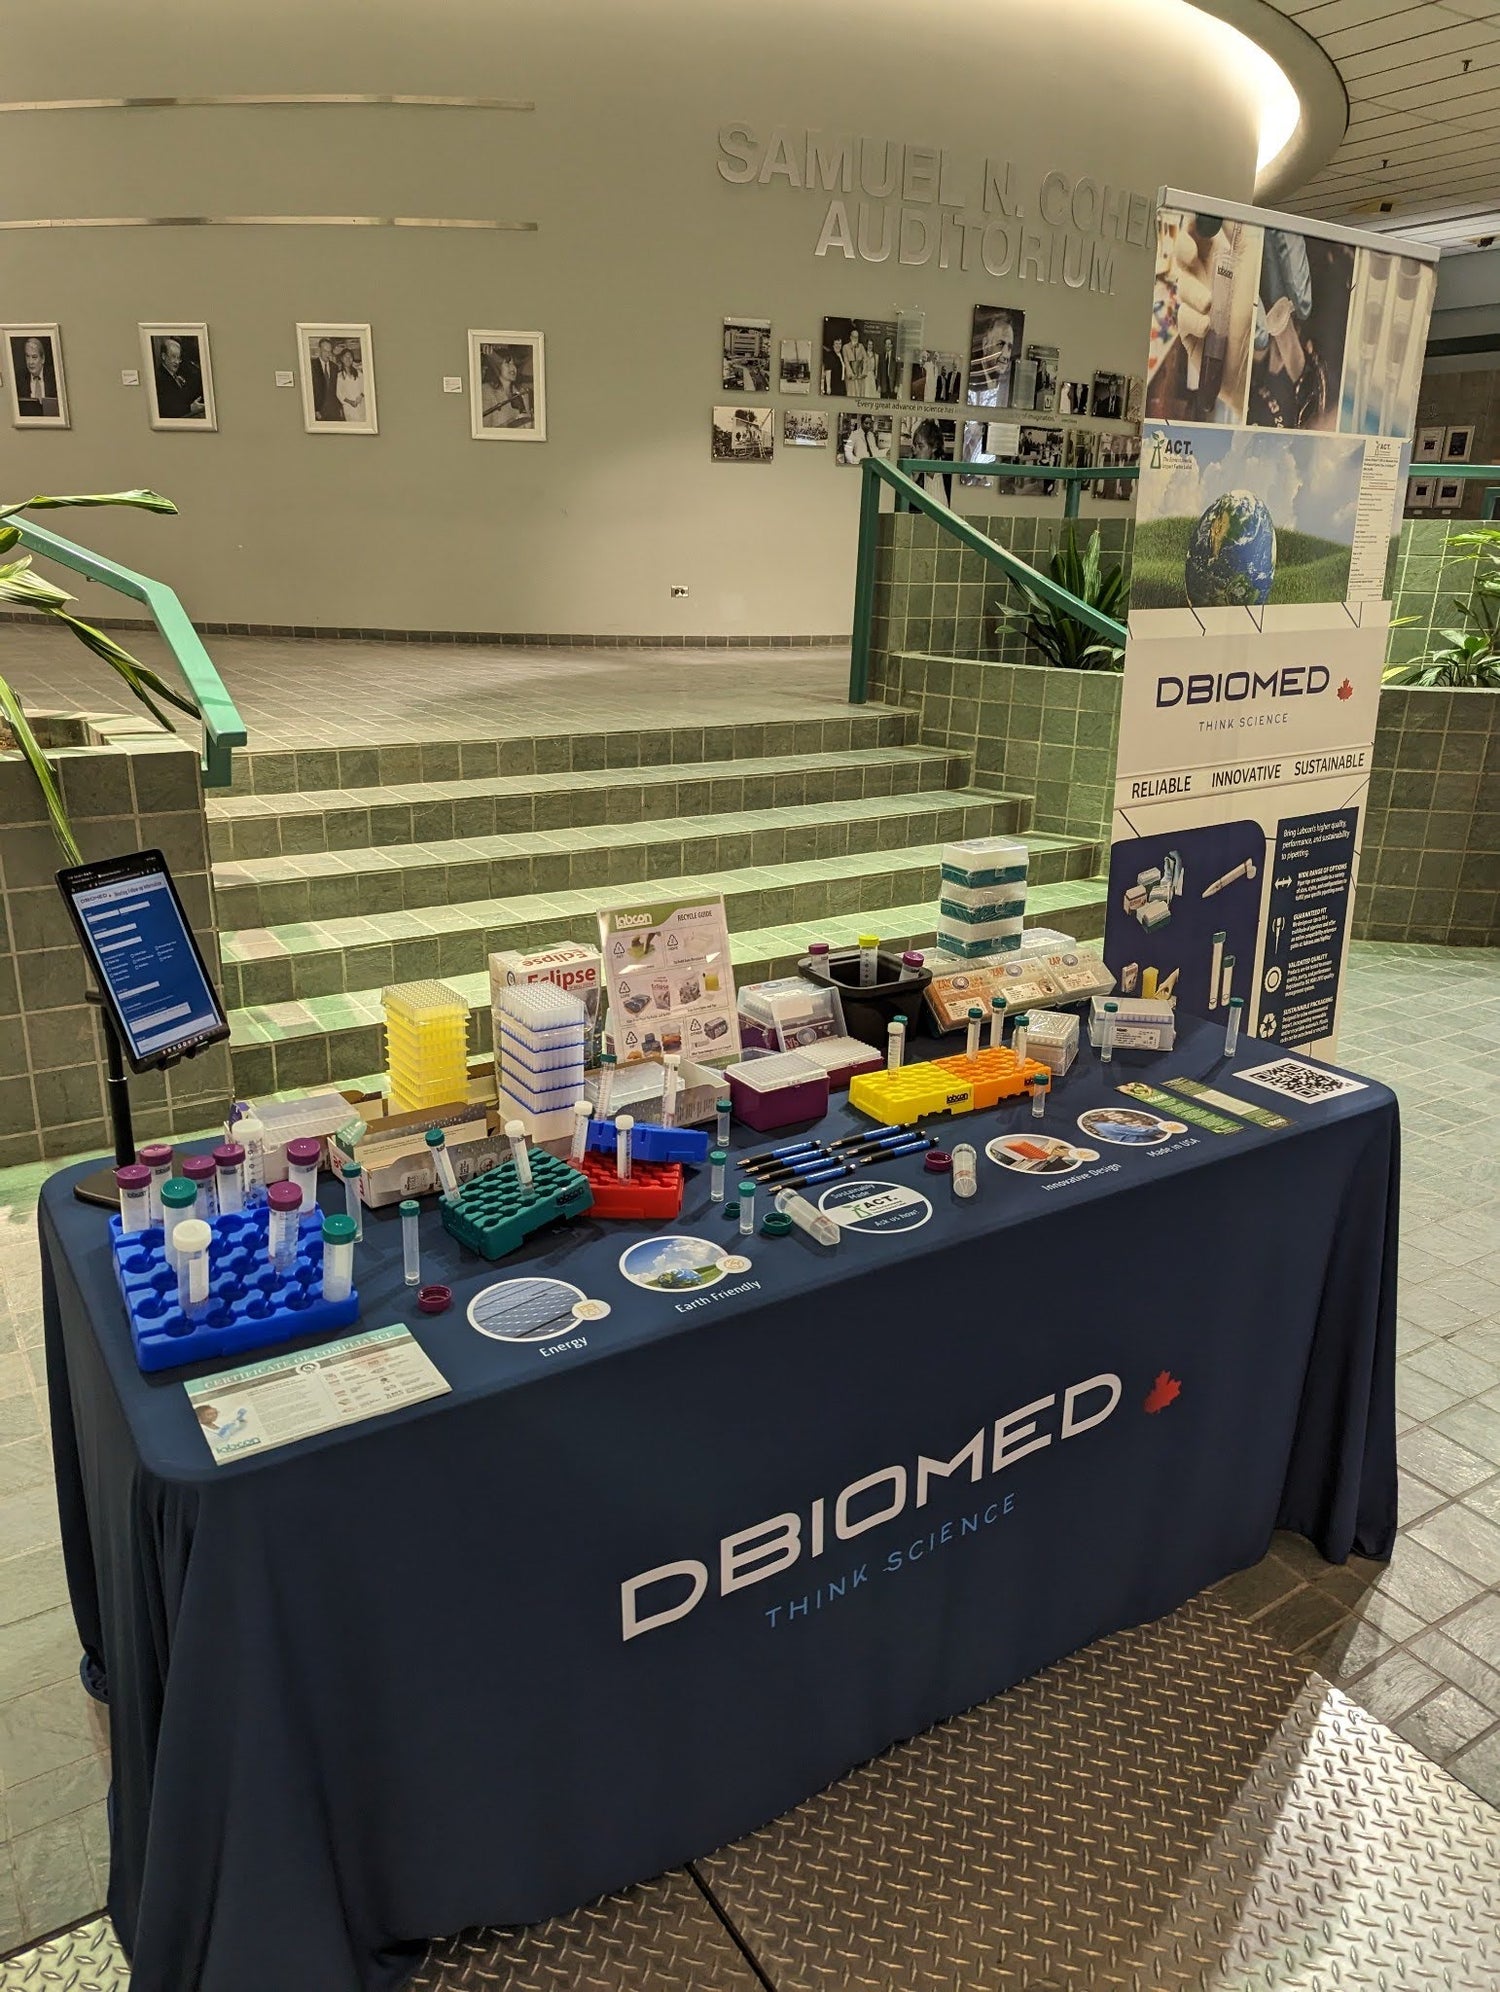 DBiomed product collection table presentation at Biotech Connect trade show